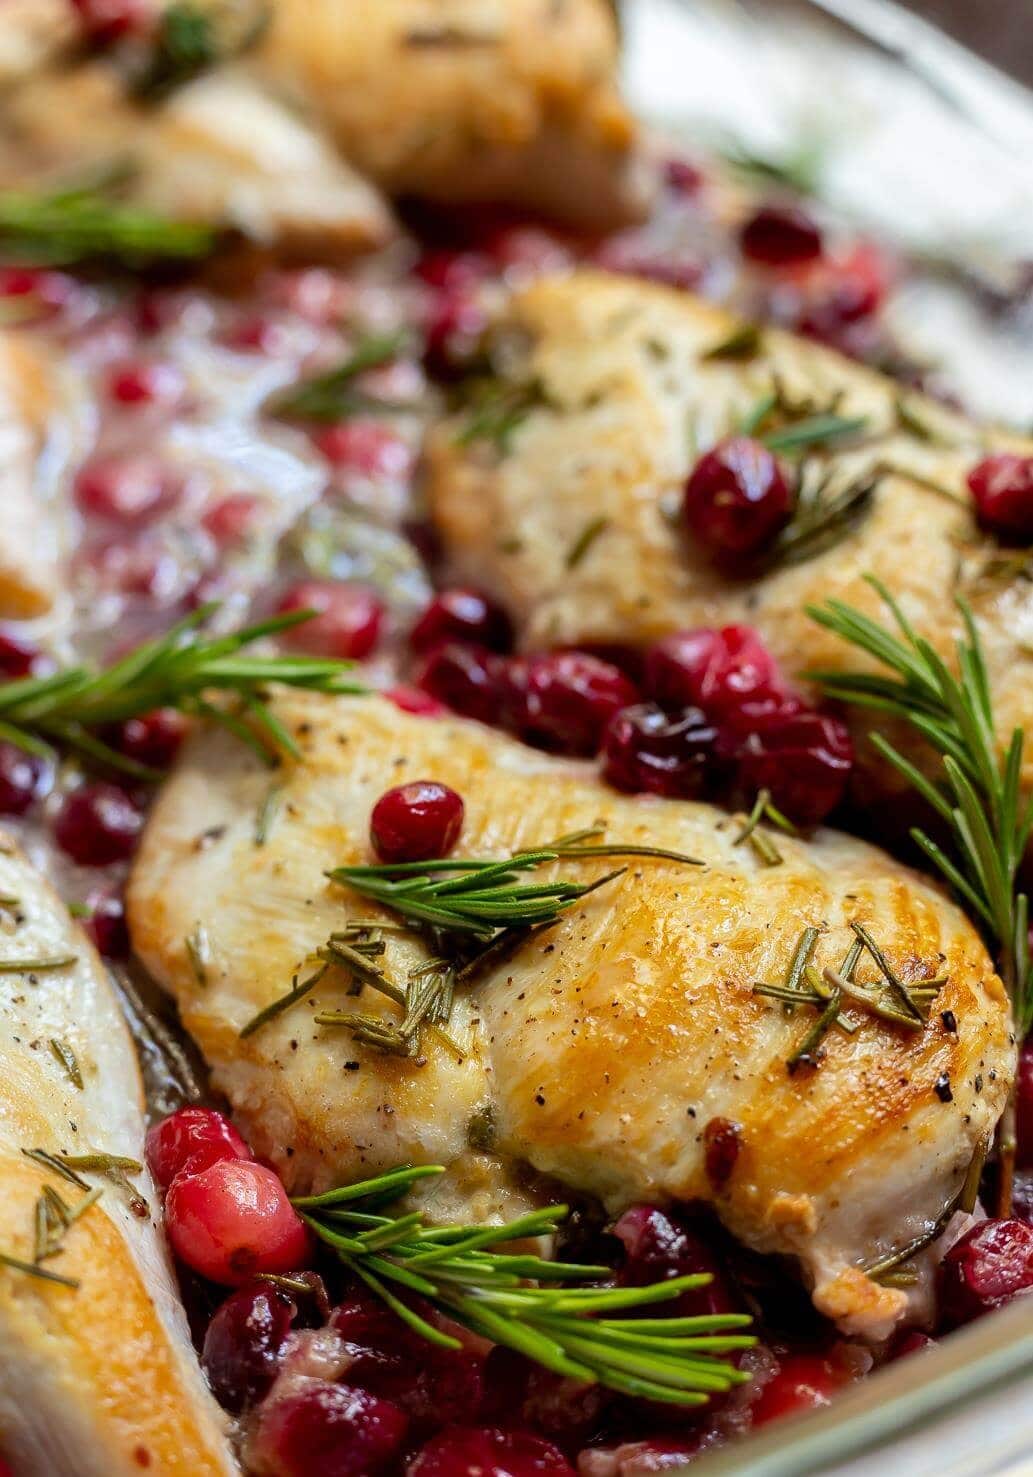 Seasoned baked chicken breast with cranberries and rosemary on a baking pan.